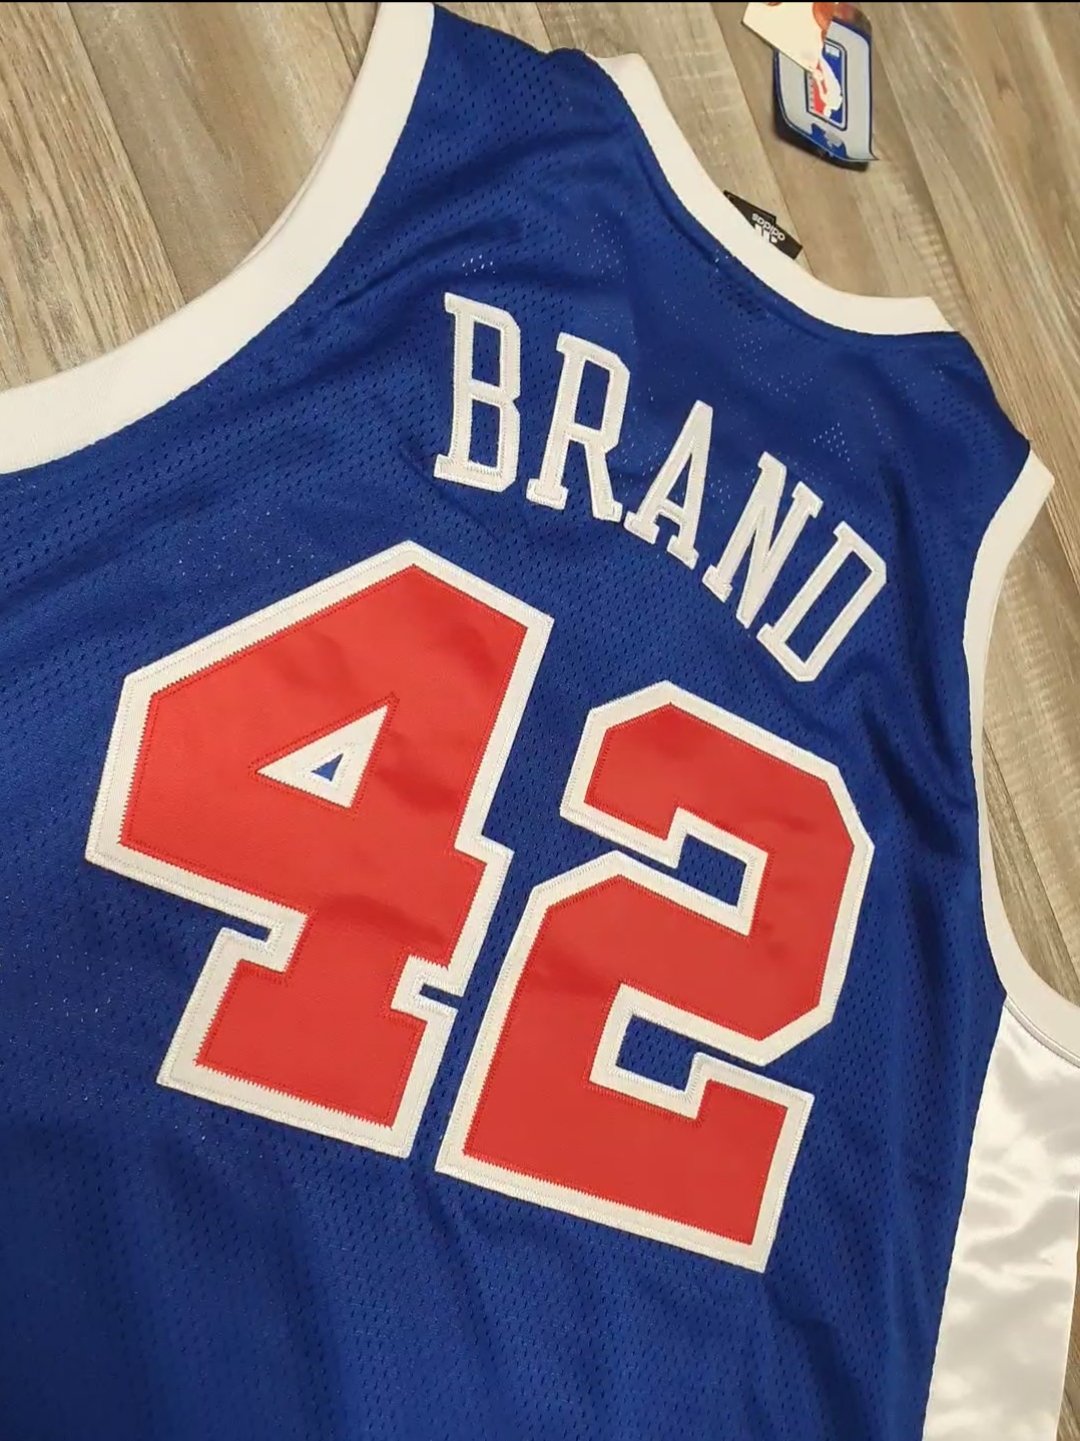 Elton Brand #42 Los Angeles Clippers Mitchell & Ness NBA